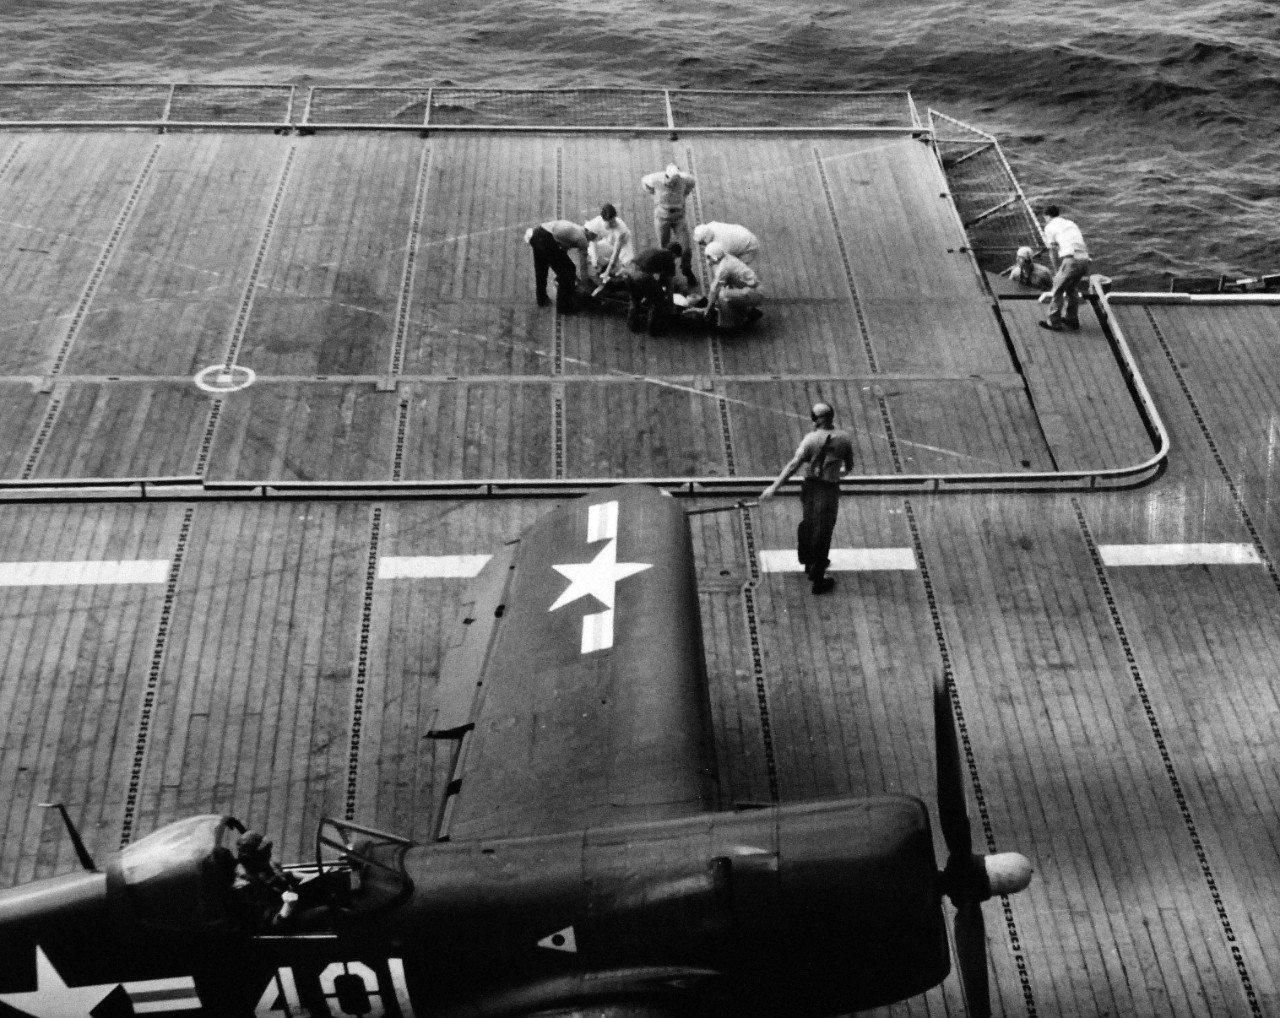 USN 710026:  Ill-fated take off of F4U from USS Boxer (CV-21) operating with Task Force 77, off Inchon, Korea, September 16, 1950.  Pilot was Ensign James Brogan, USN.   Rescued pilot suffering from shock and superficial burns is transferred to sick bay.  This image is provided to show the courage it took to fly during these initial missions.      Official U.S. Navy Photograph, now in the collections of the National Archives.  